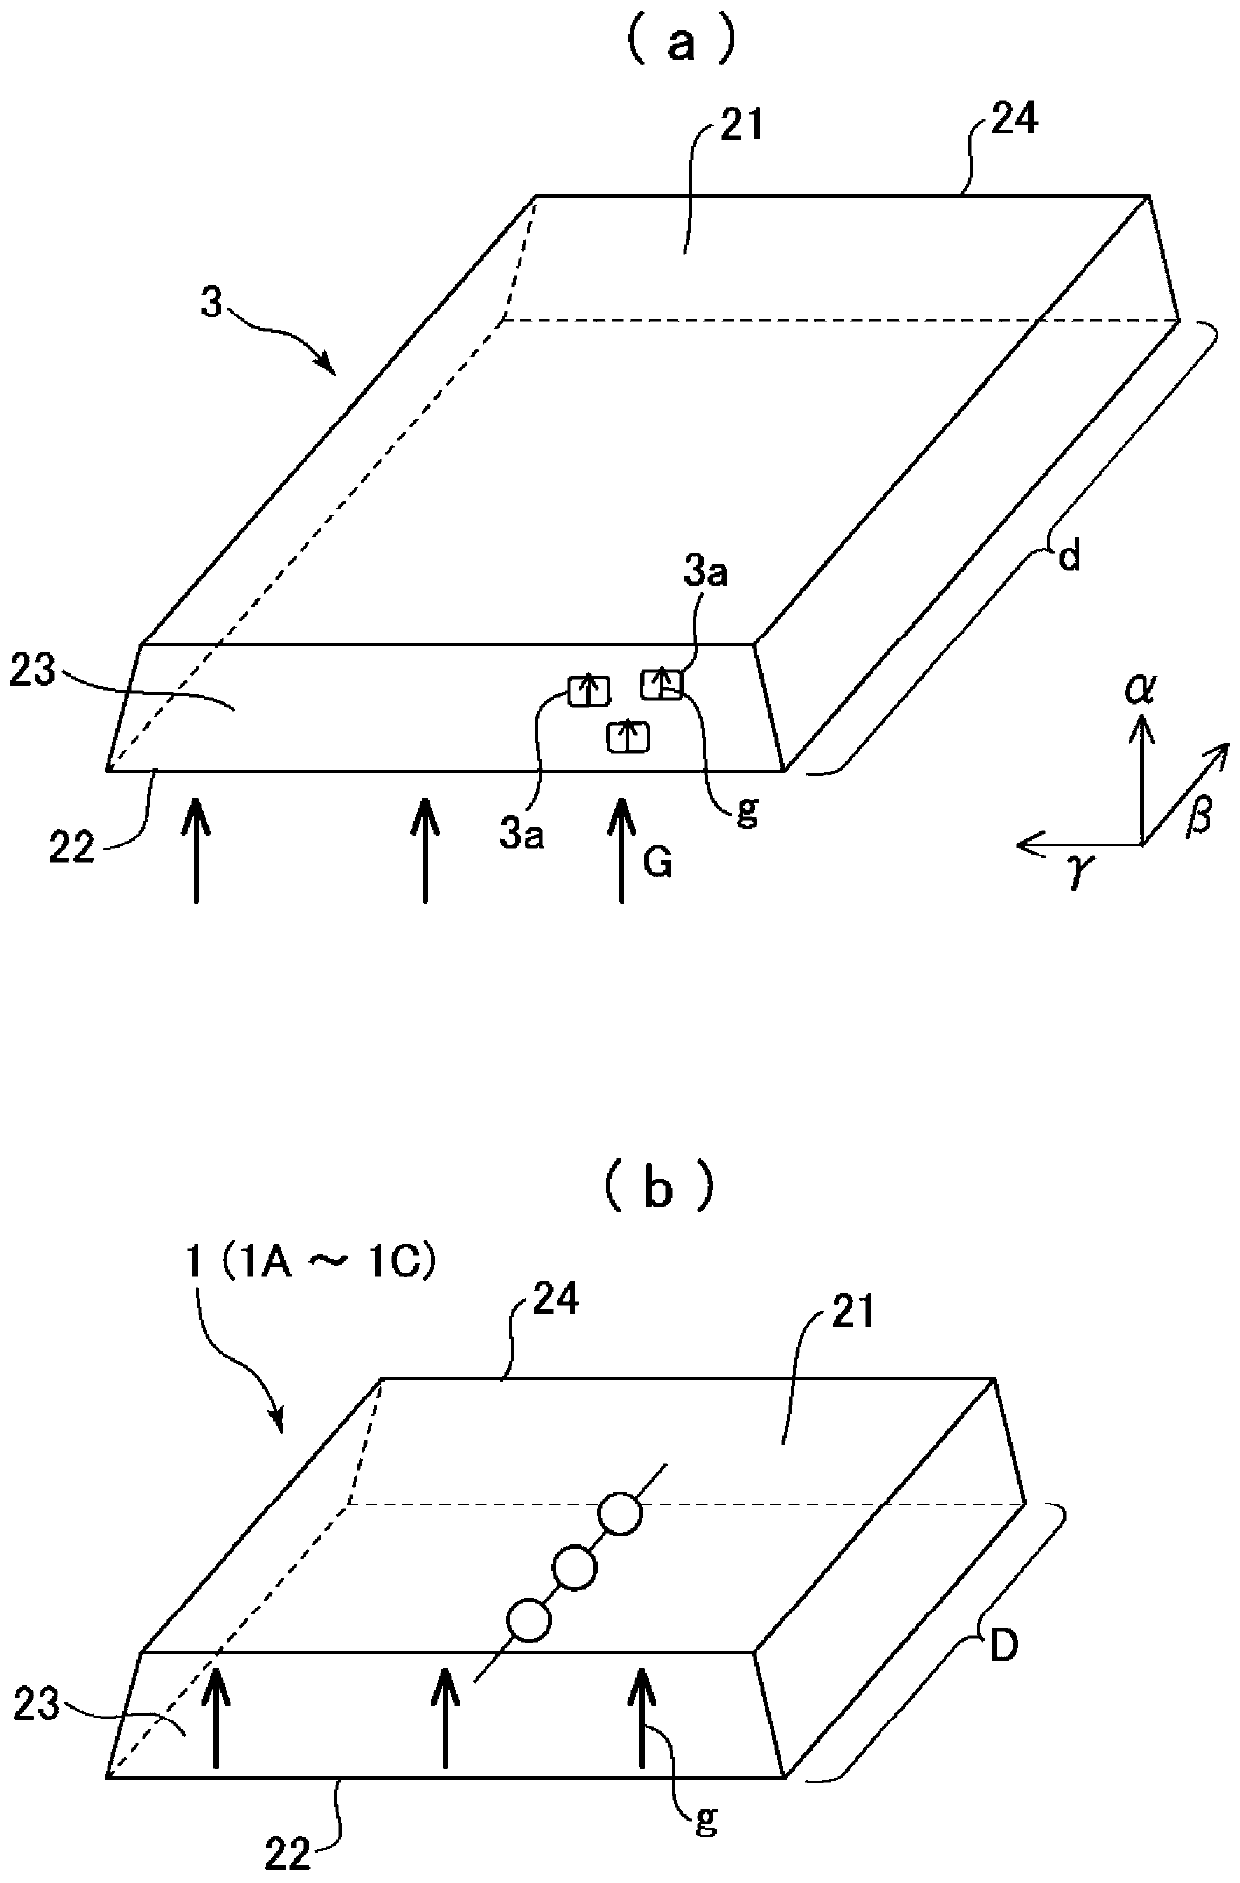 Sintered compact for forming rare earth sintered magnet, and method for manufacturing same